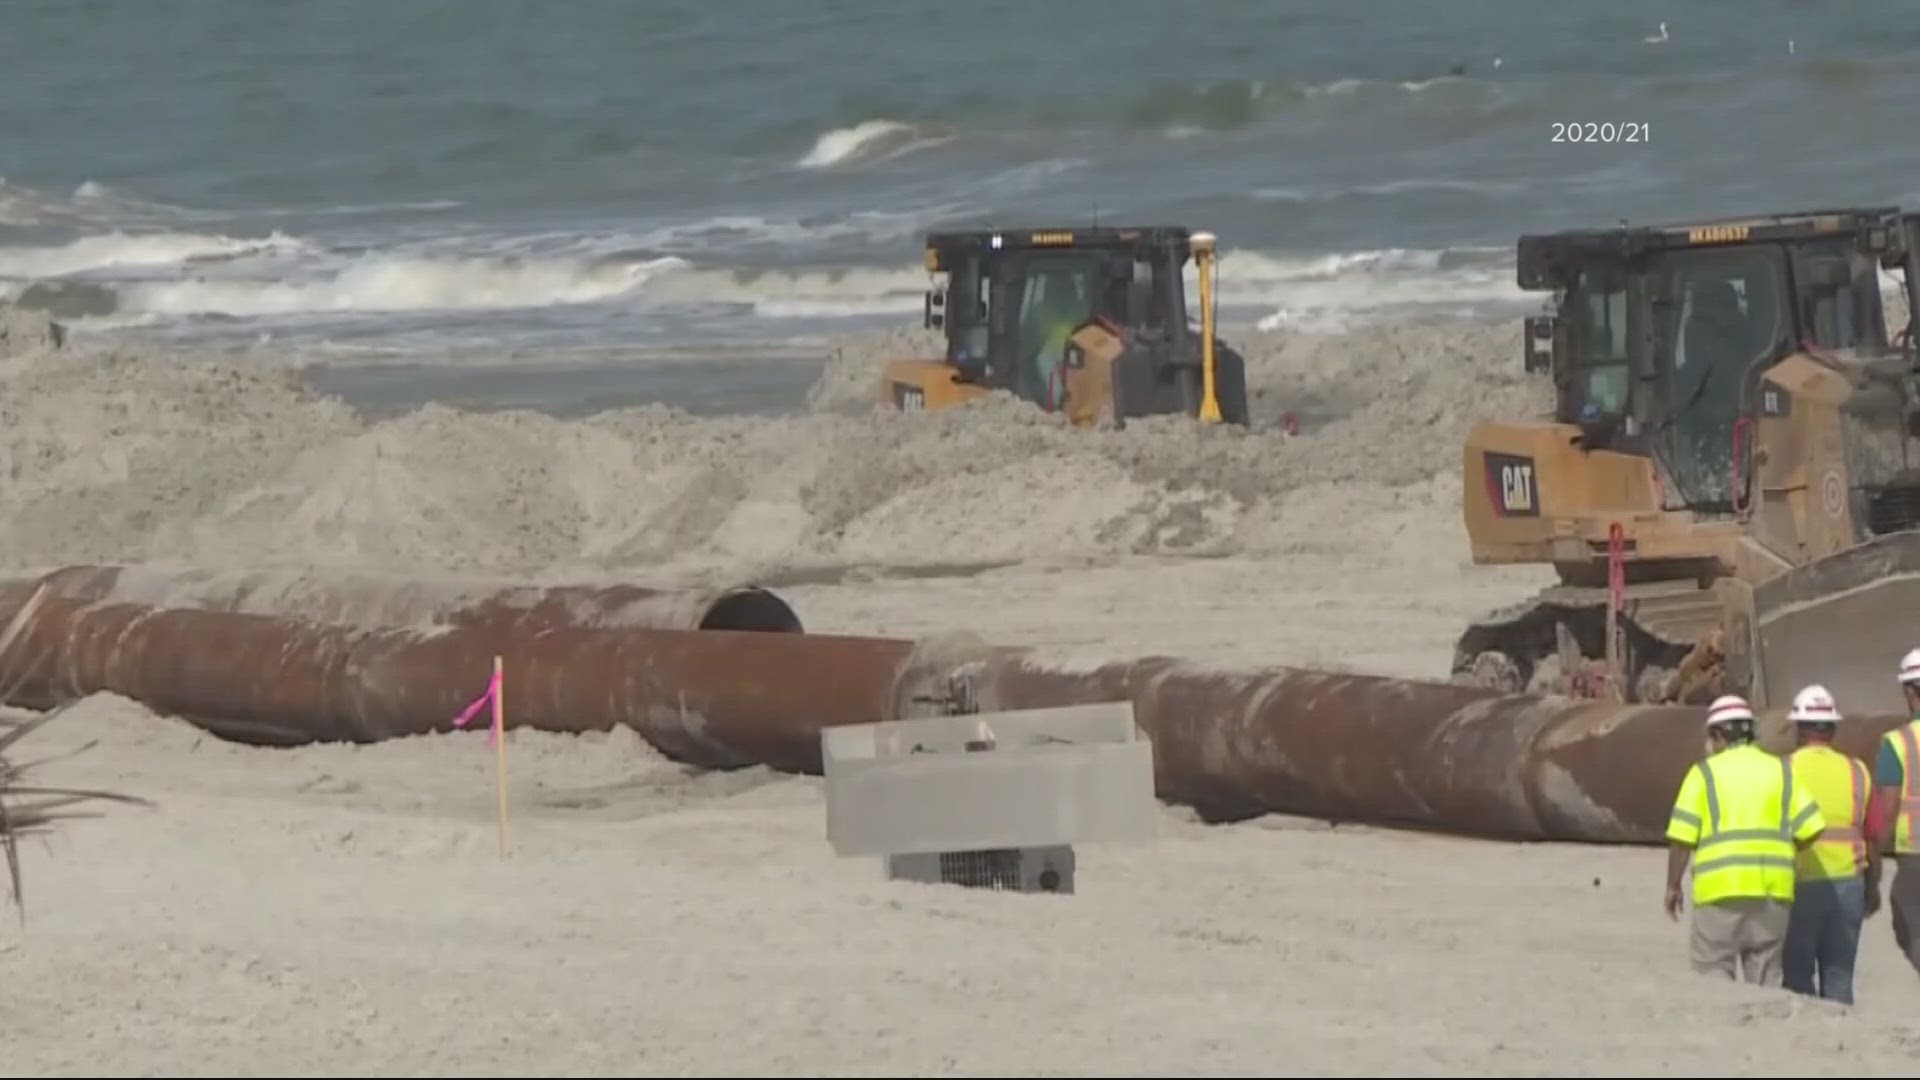 The $20.2 million project set to begin in September, will be covered with federal dollars to replenish sand on beaches damaged from year's past storms.